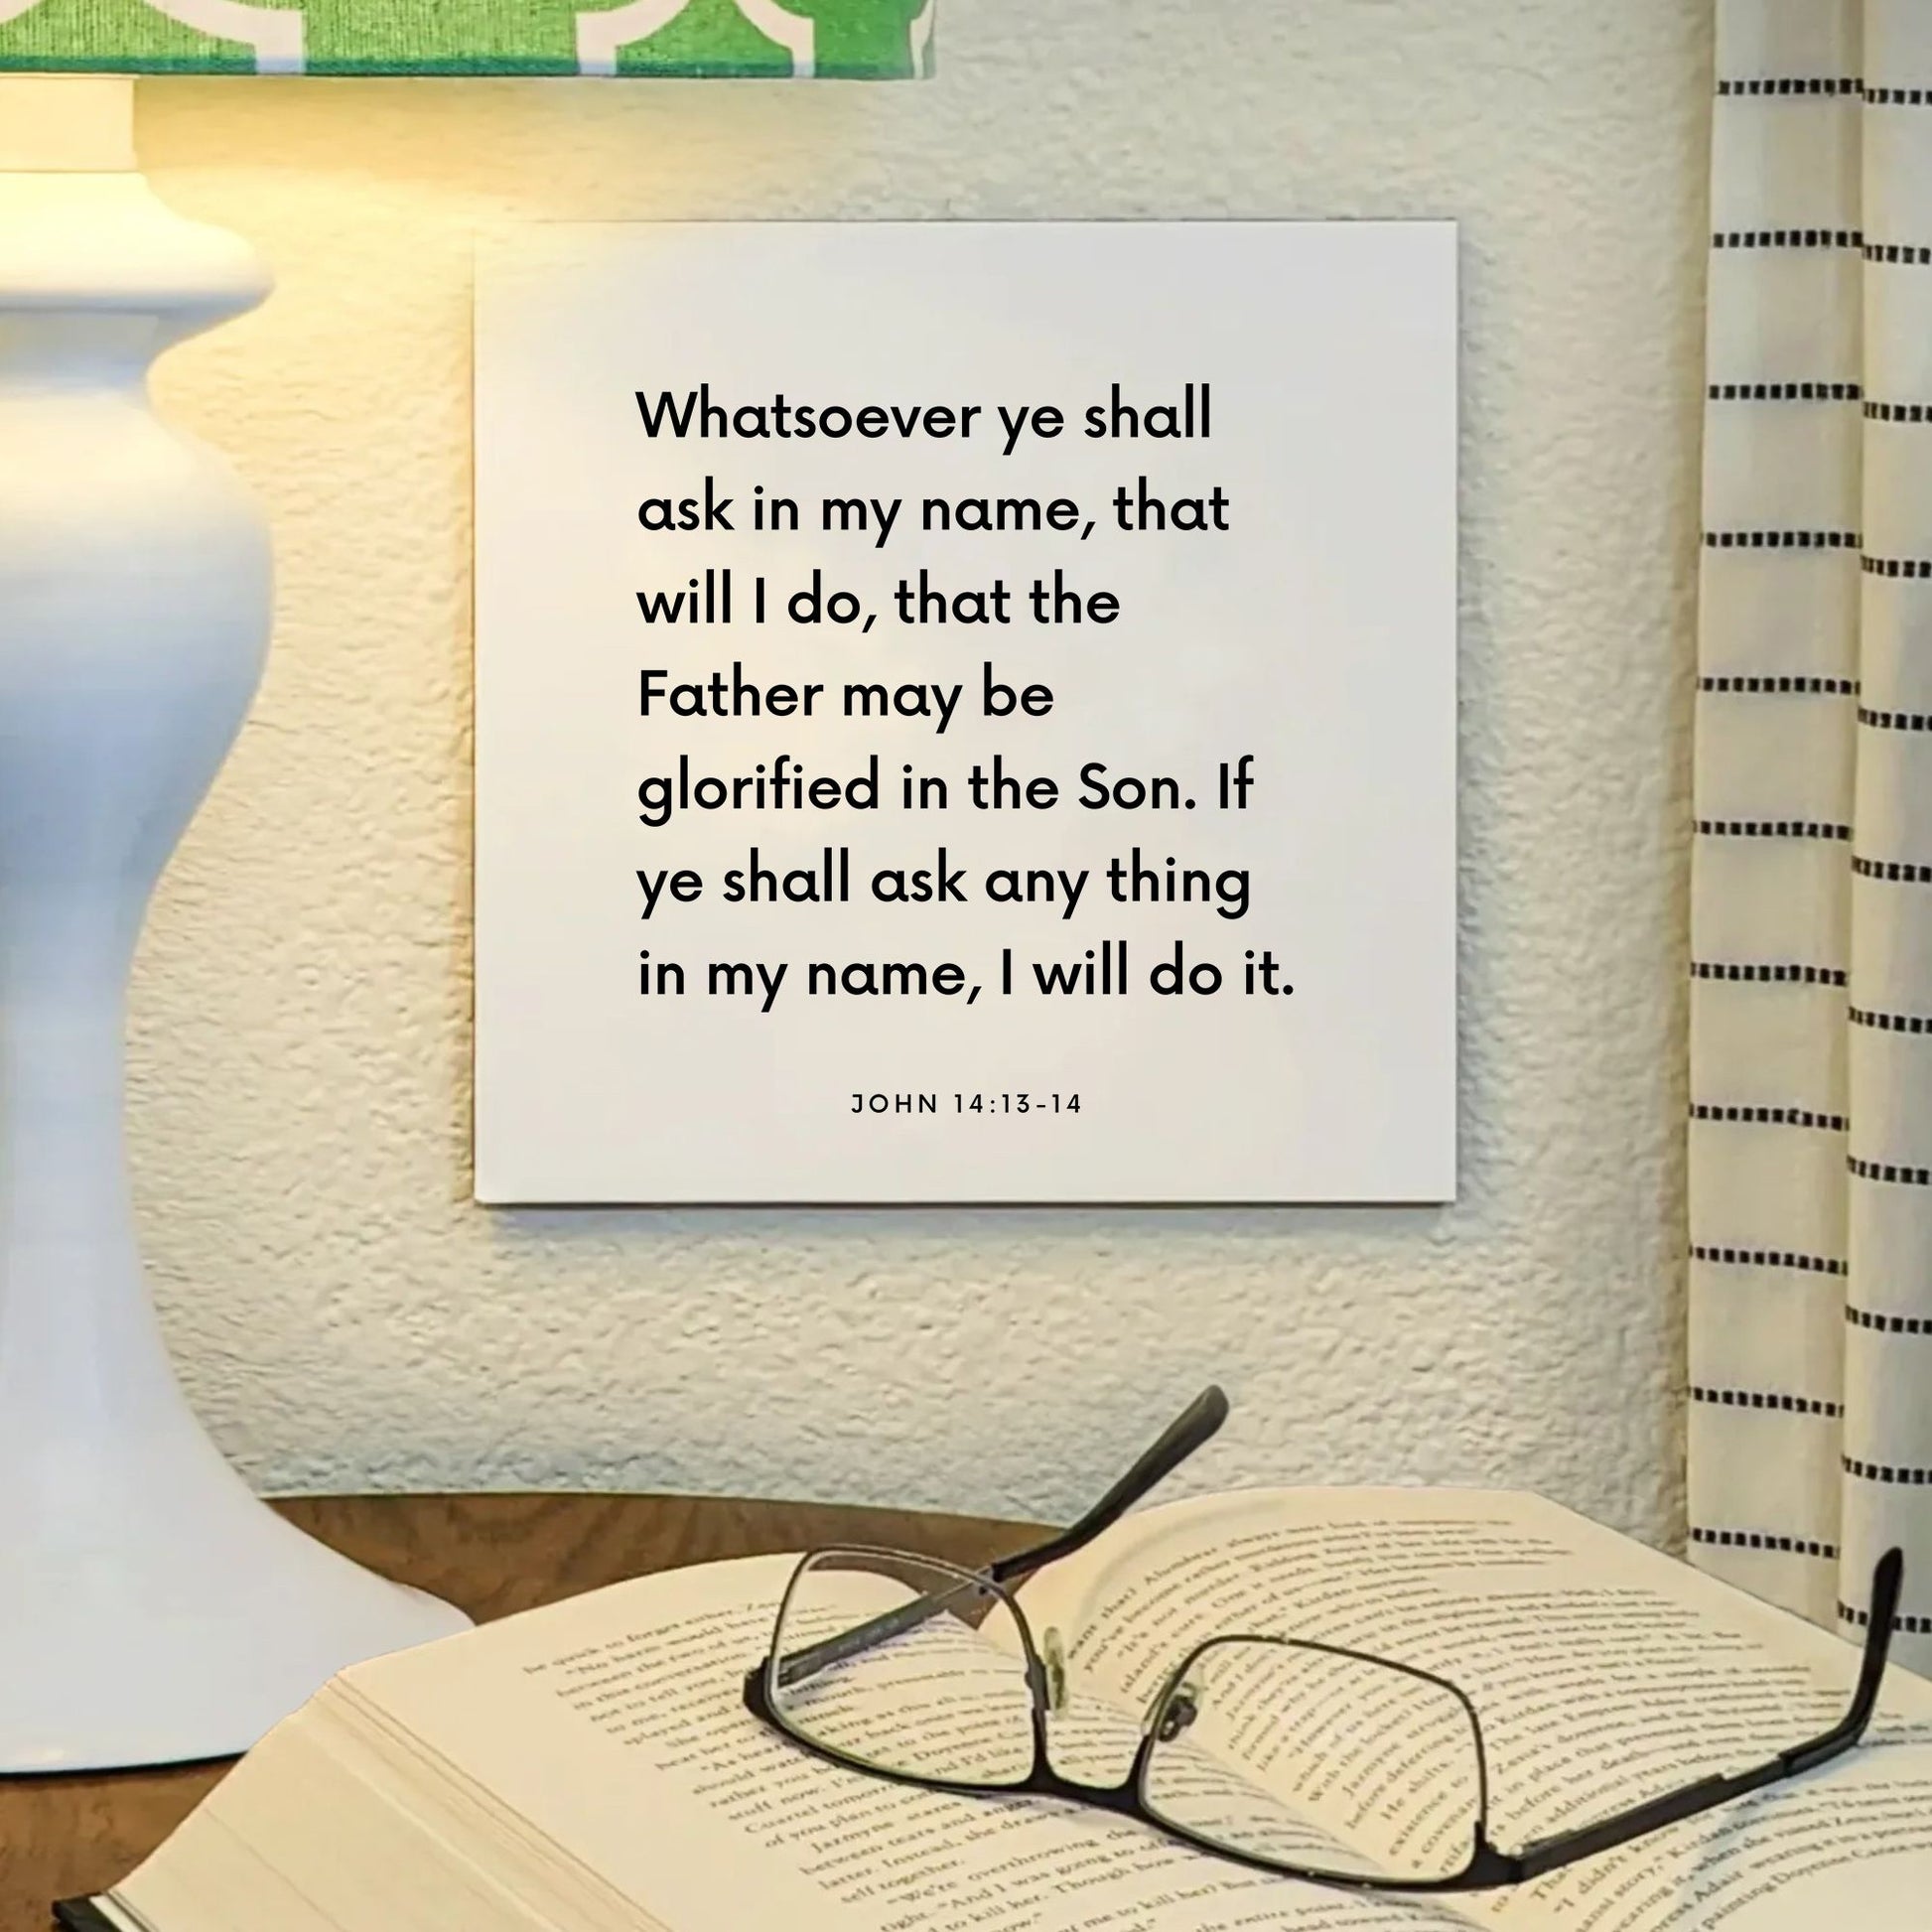 Lamp mouting of the scripture tile for John 14:13-14 - "Whatsoever ye shall ask in my name, that will I do"